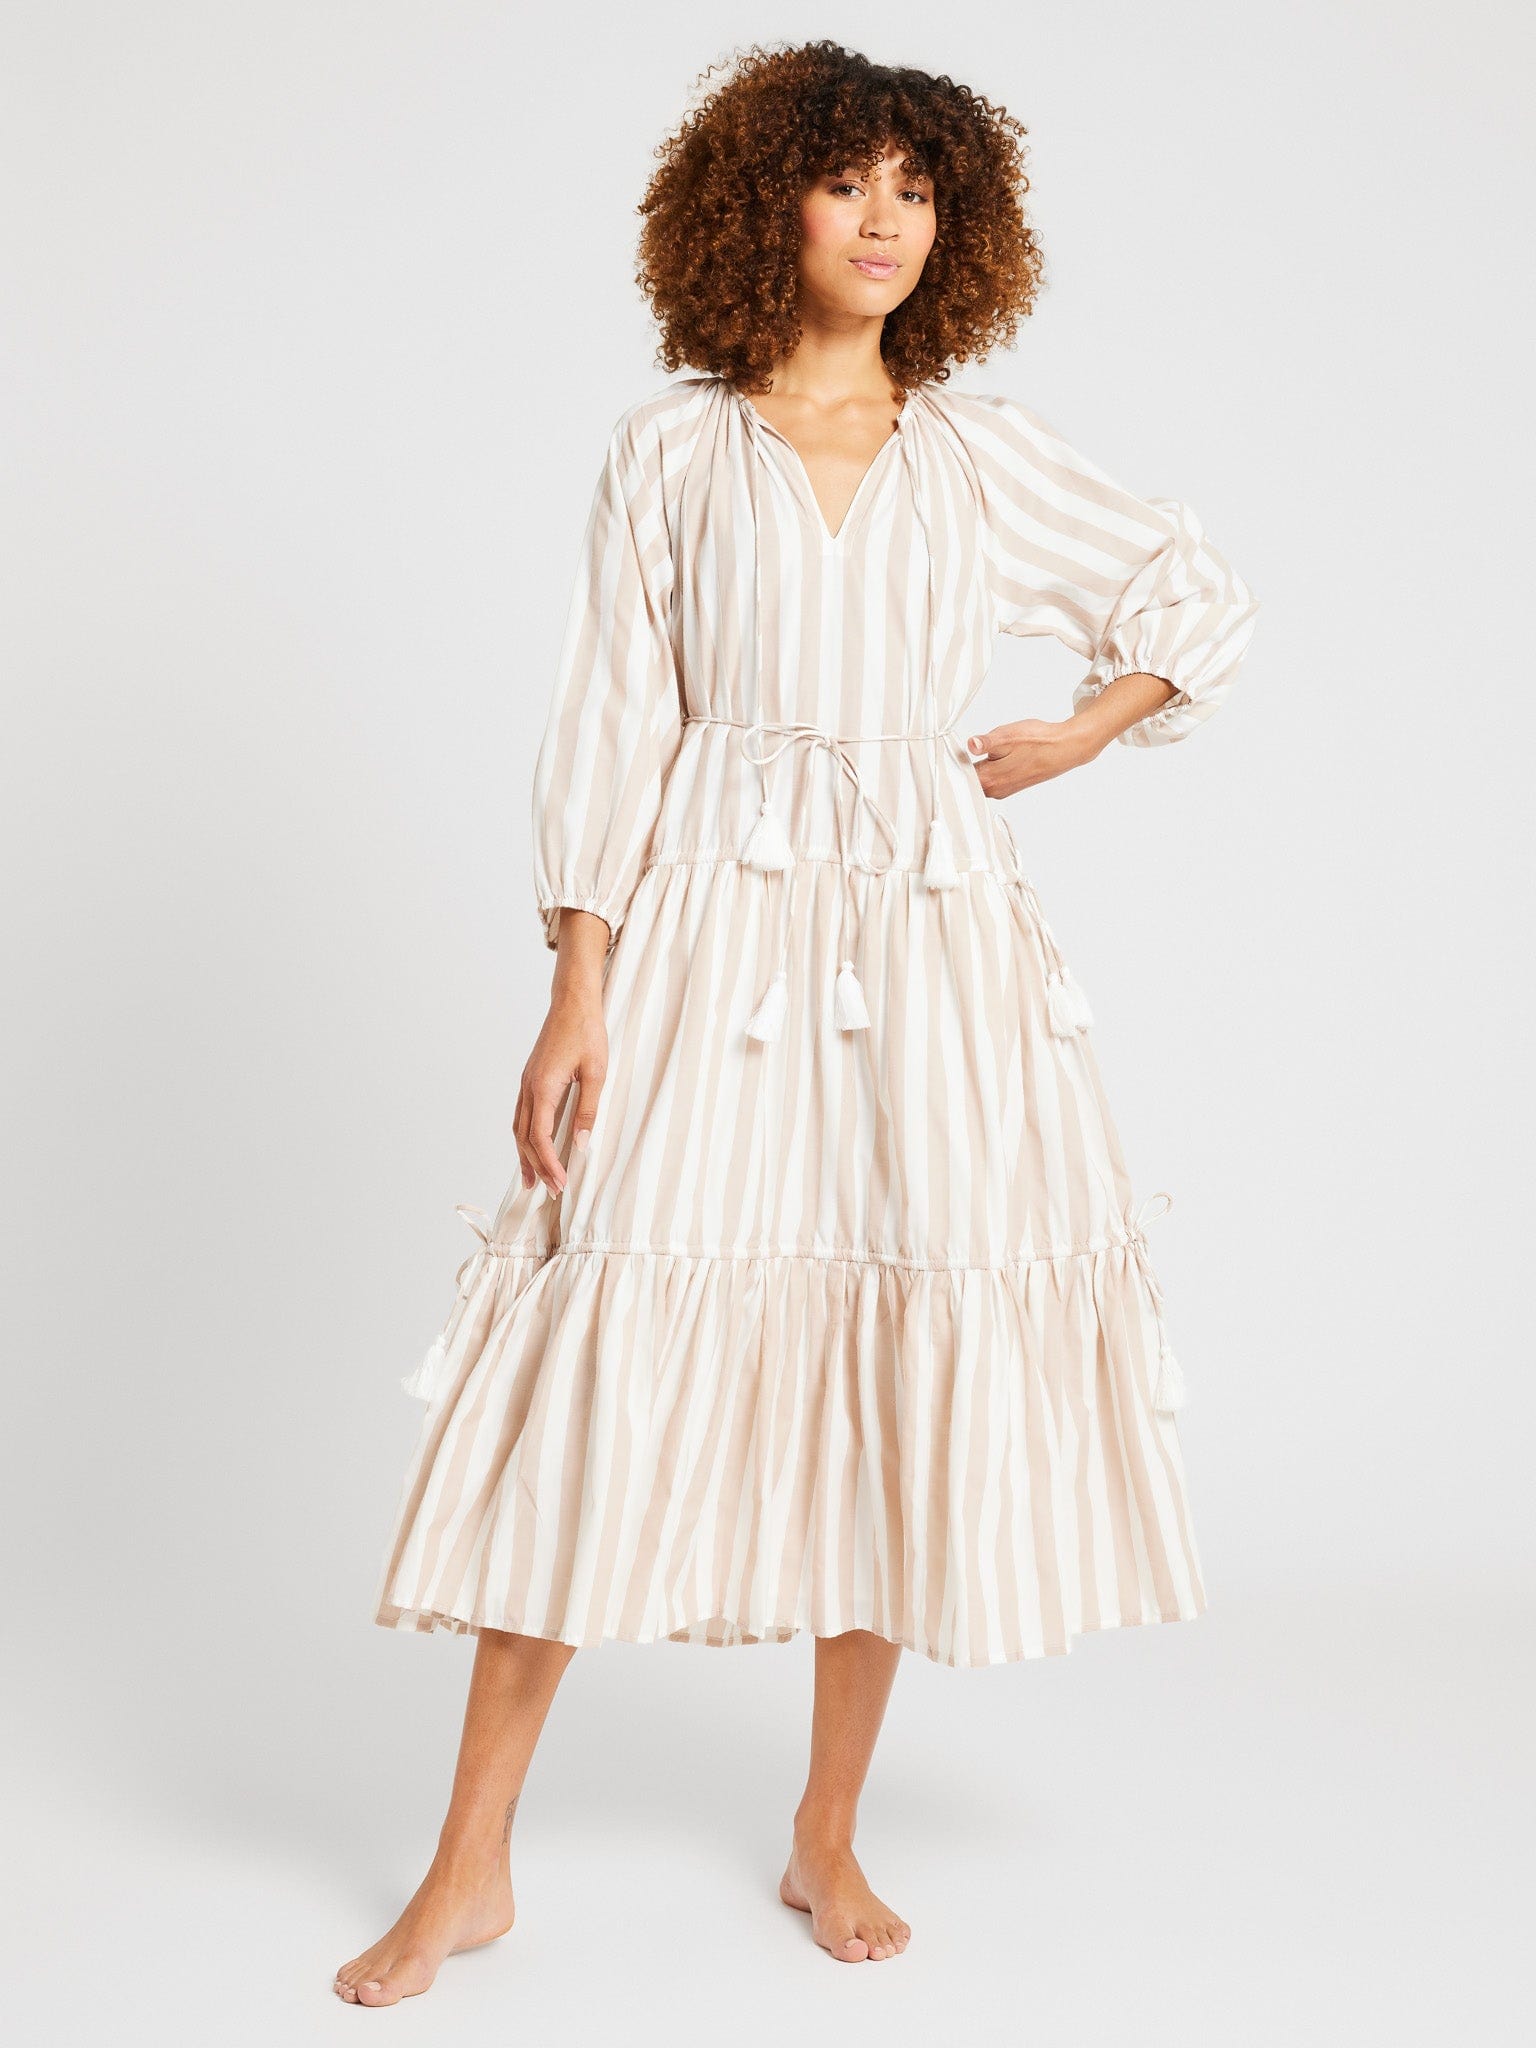 MILLE Clothing Natalia Dress in Cappuccino Stripe